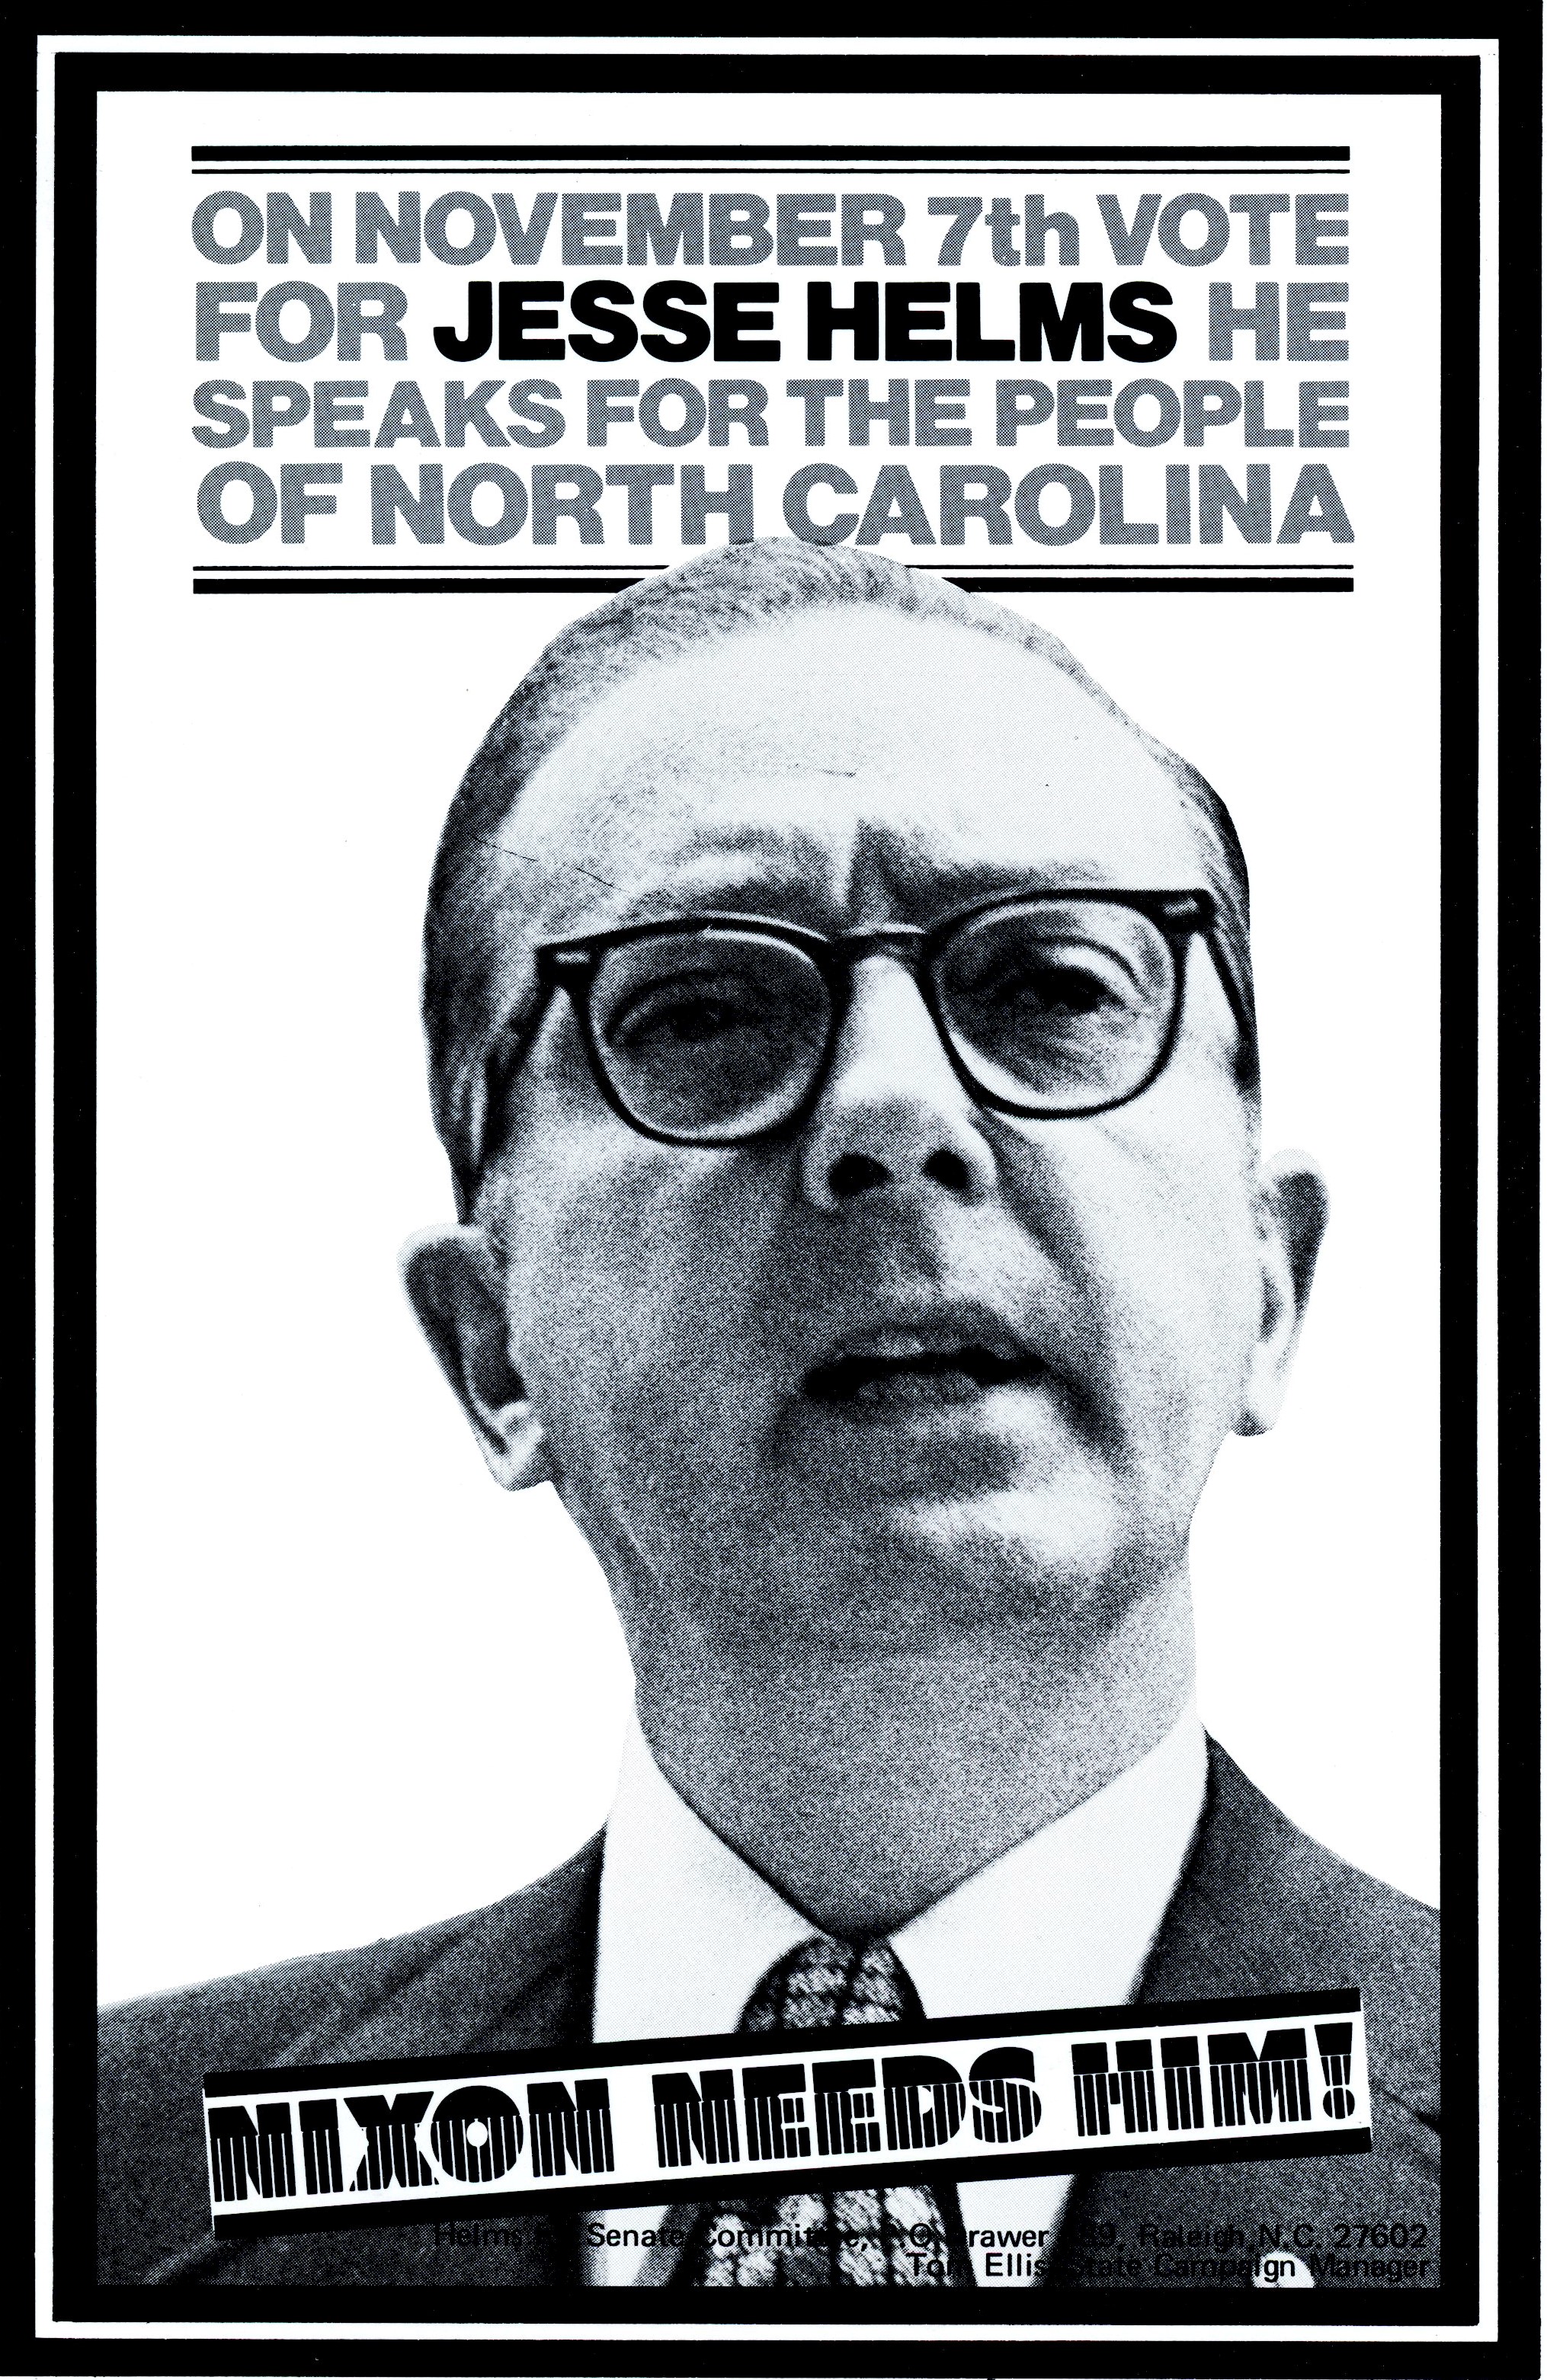 One of the campaign flyers from Jesse Helms’ 1972 Senate race.